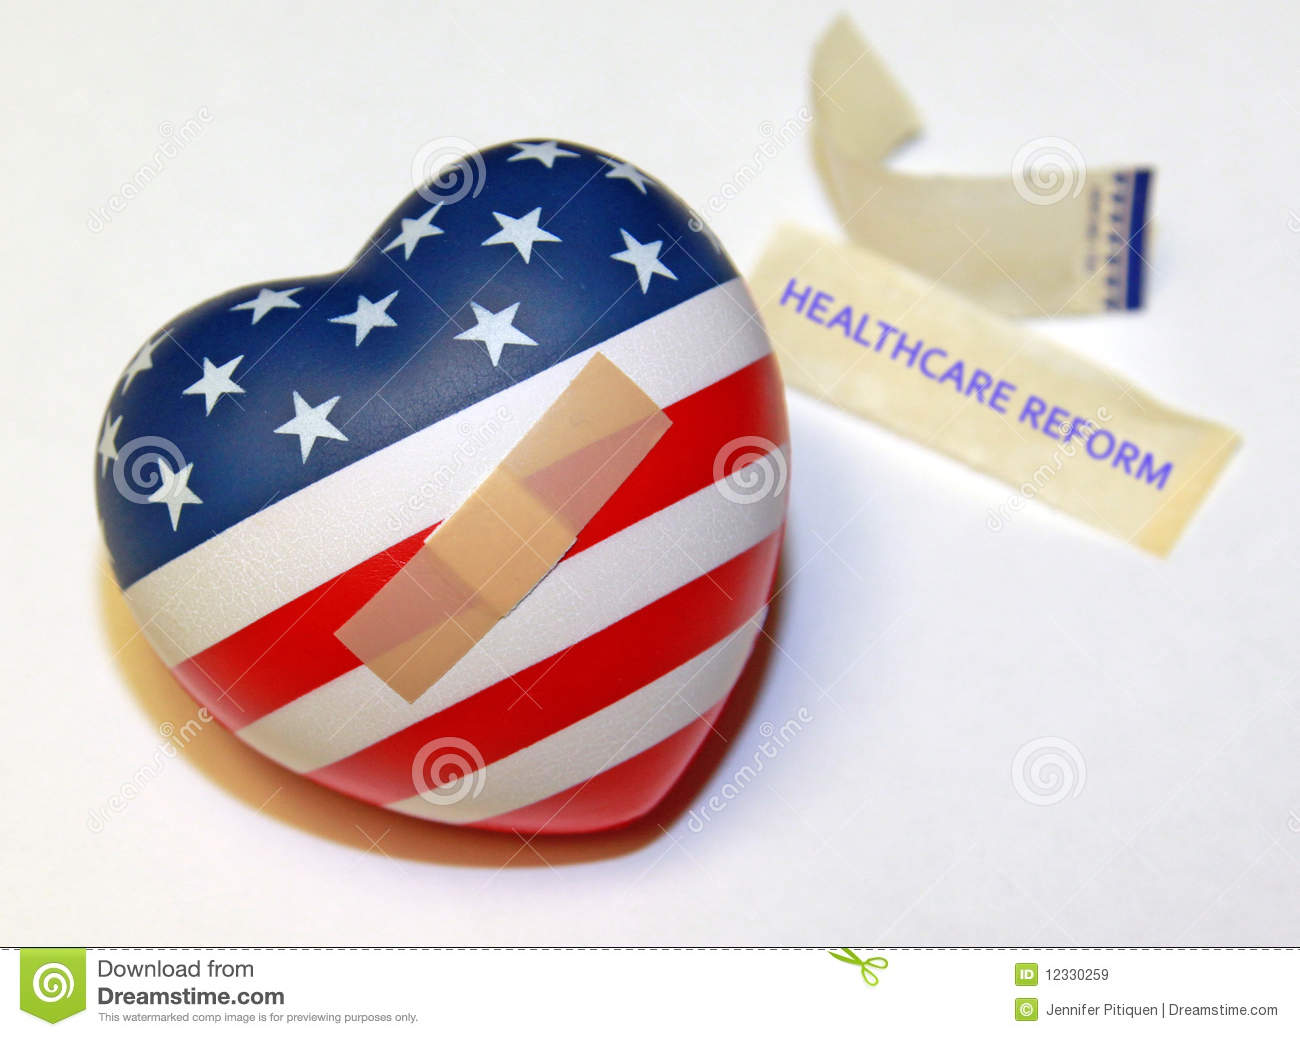 Us Health Care Reform Concept  A Us Heart Shaped Flag With A Band Aid    